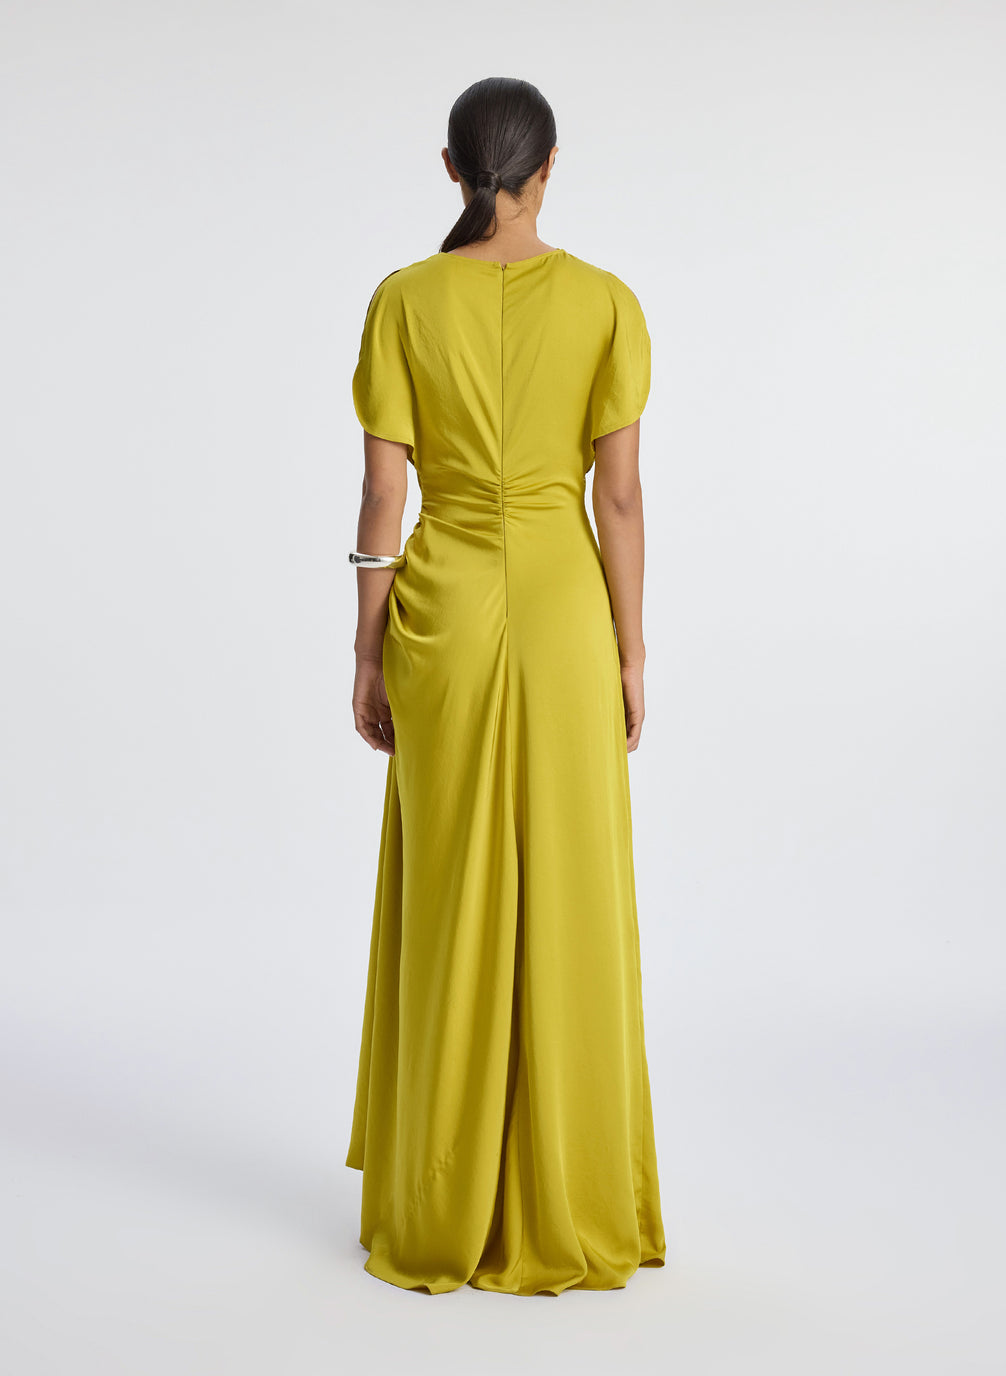 back view of woman wearing yellow satin short sleeve gown